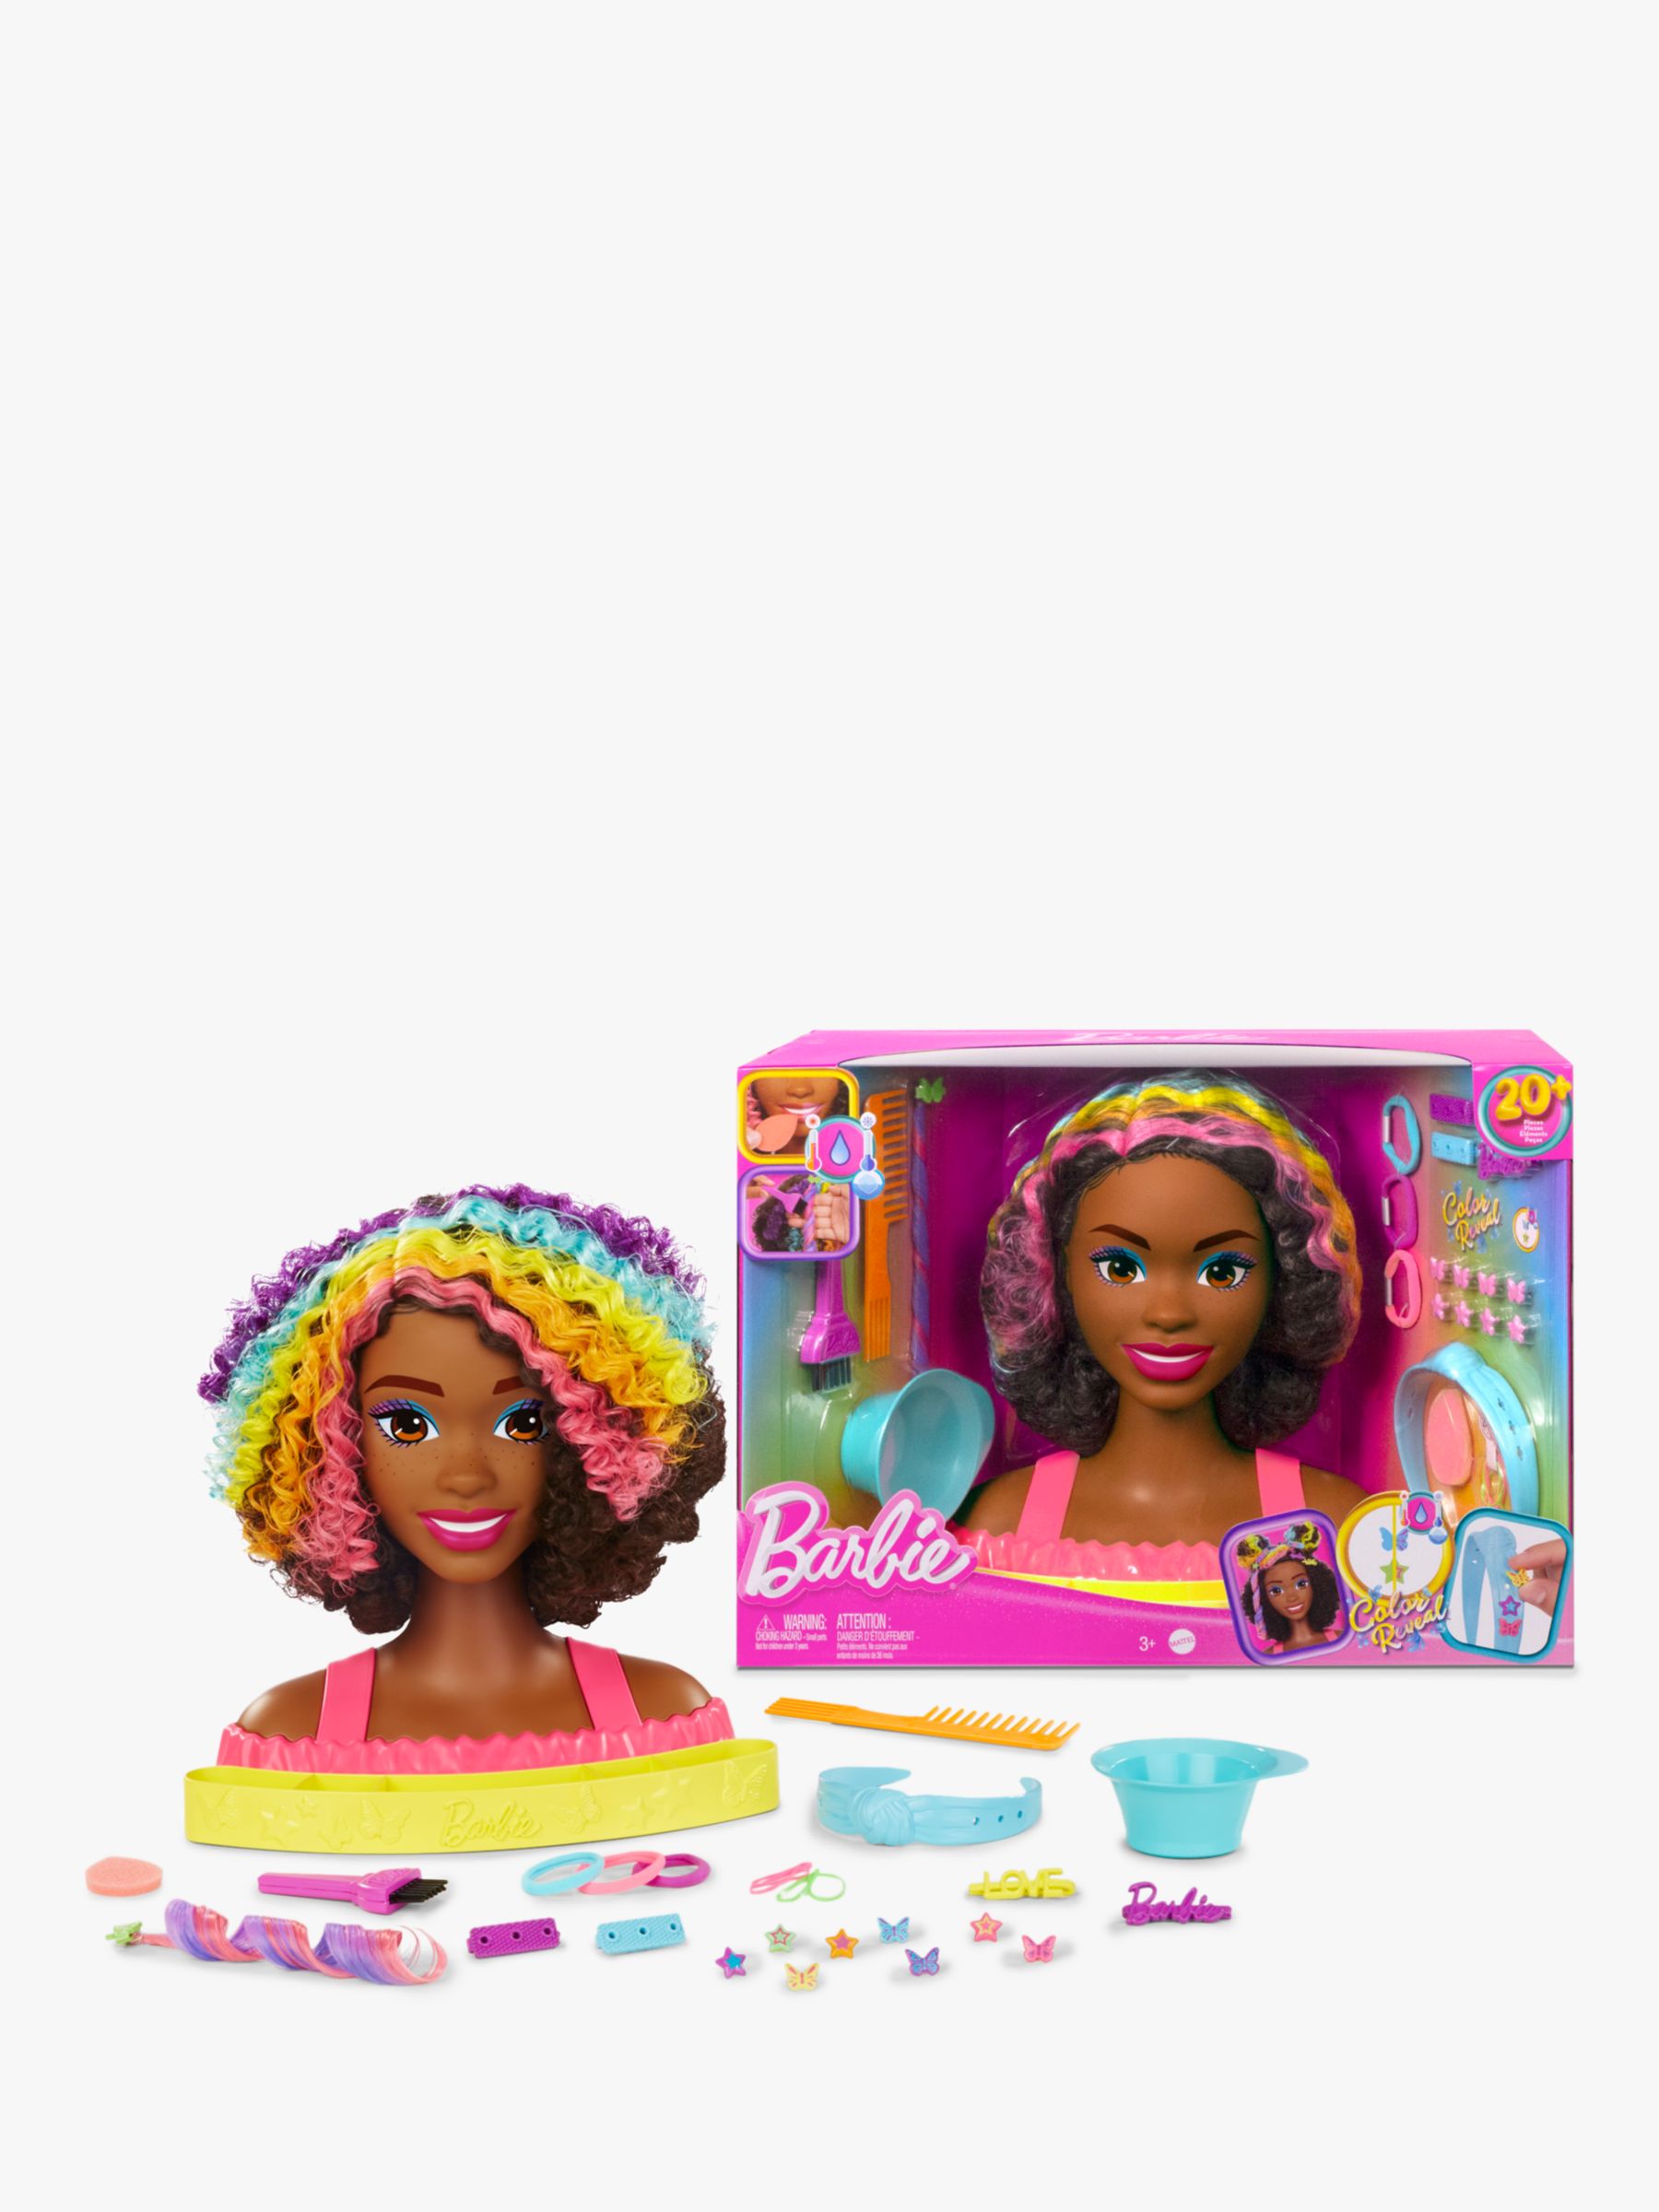 Barbie Deluxe Styling Head, Barbie Totally Hair, Curly Brown